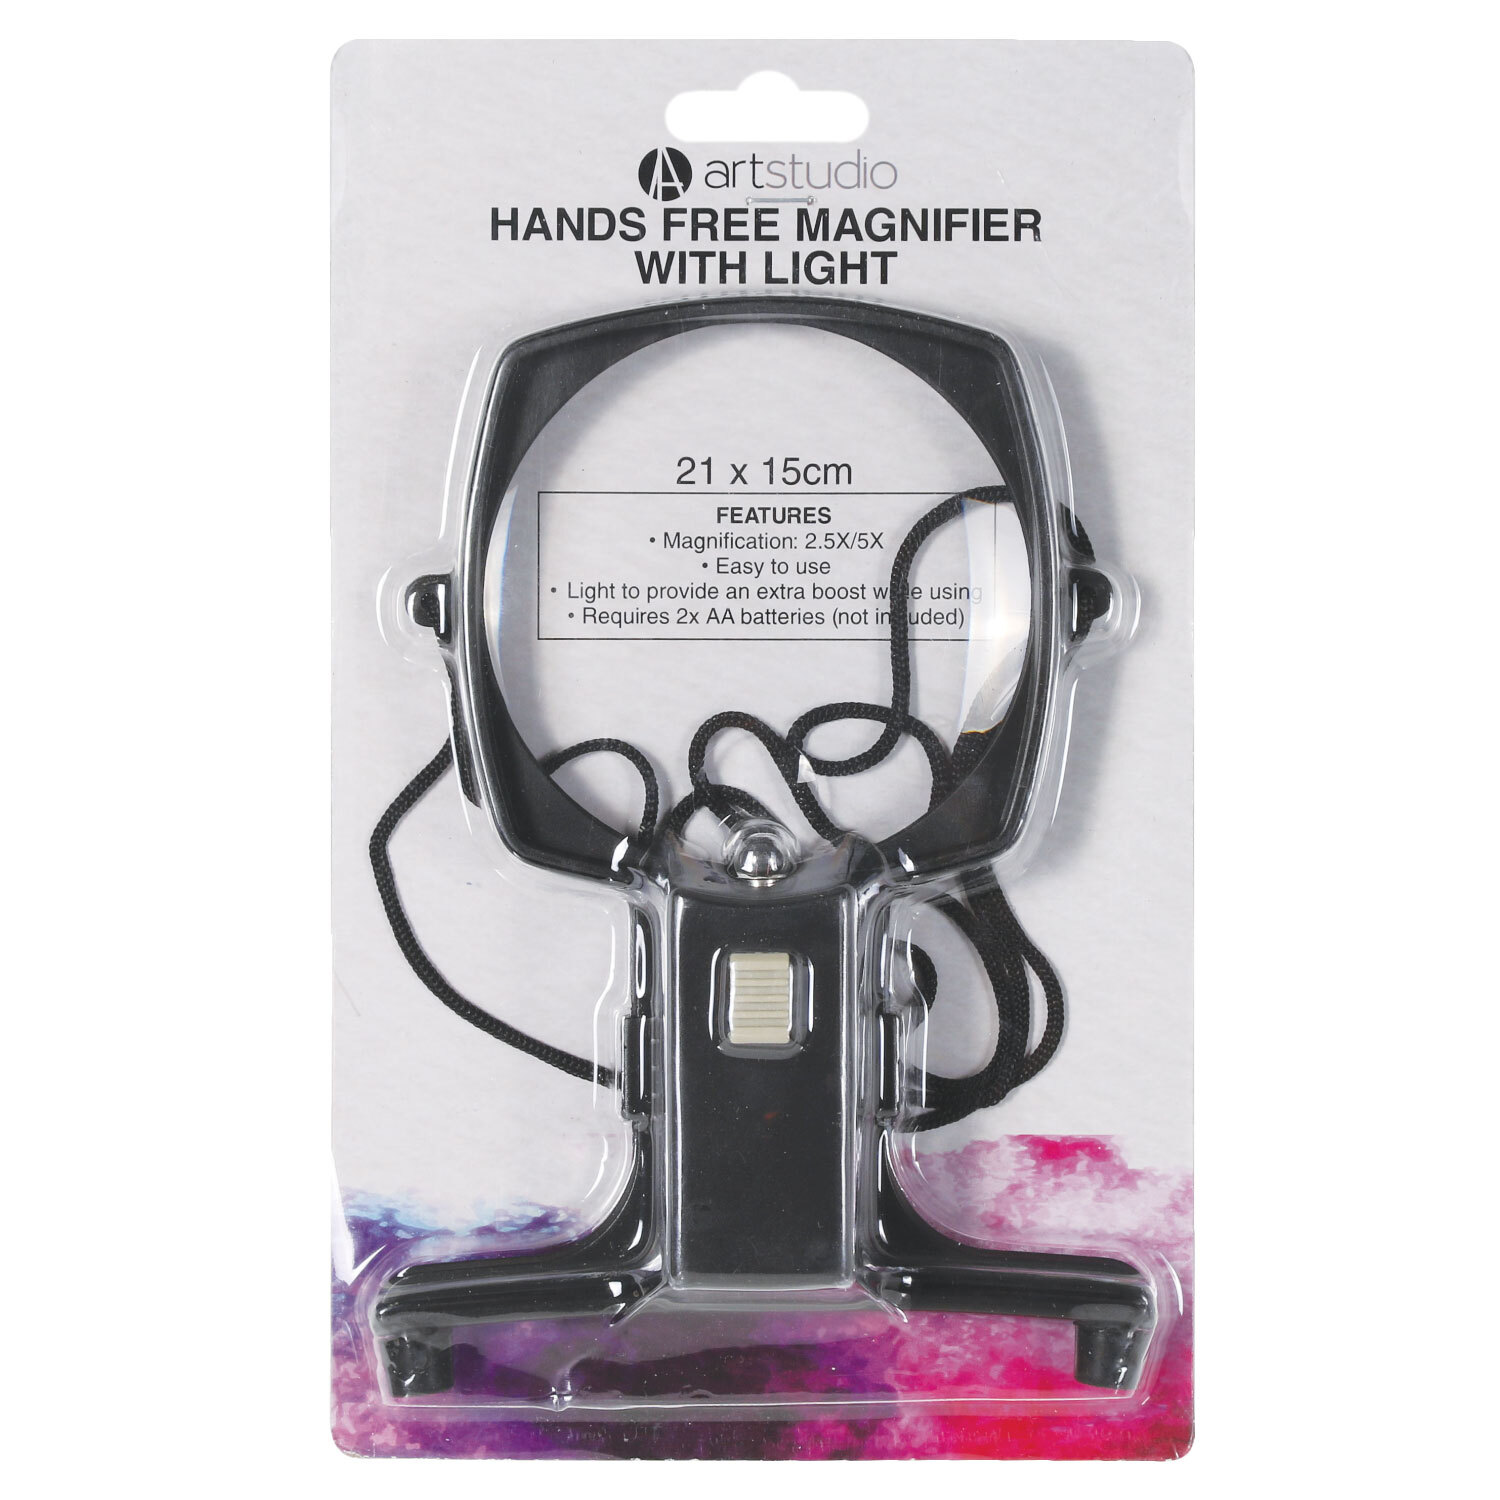 Hands Free Magnifier with Light Image